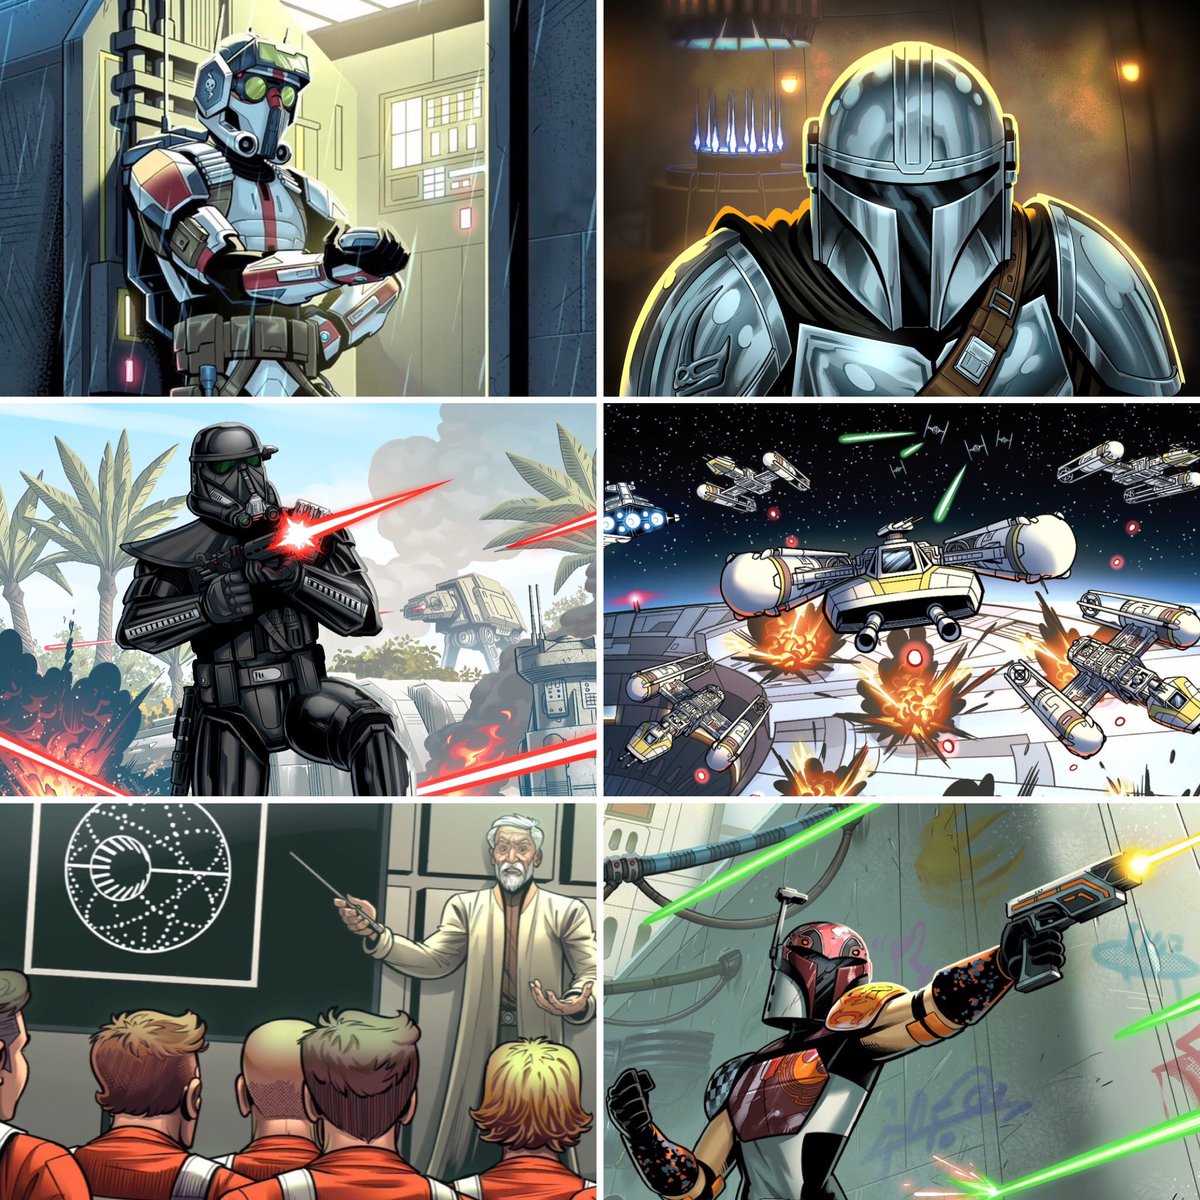 May the 4th be with you! Nothing new to share yet, but in the meantime here’s a recap of the six card pieces I’ve been able to share between sets 1 and 2 of @UnlimitedFFG , still plenty more on the way too 😊 #maythe4thbewithyou #starwarsday #starwars #starwarsunlimited #cardart